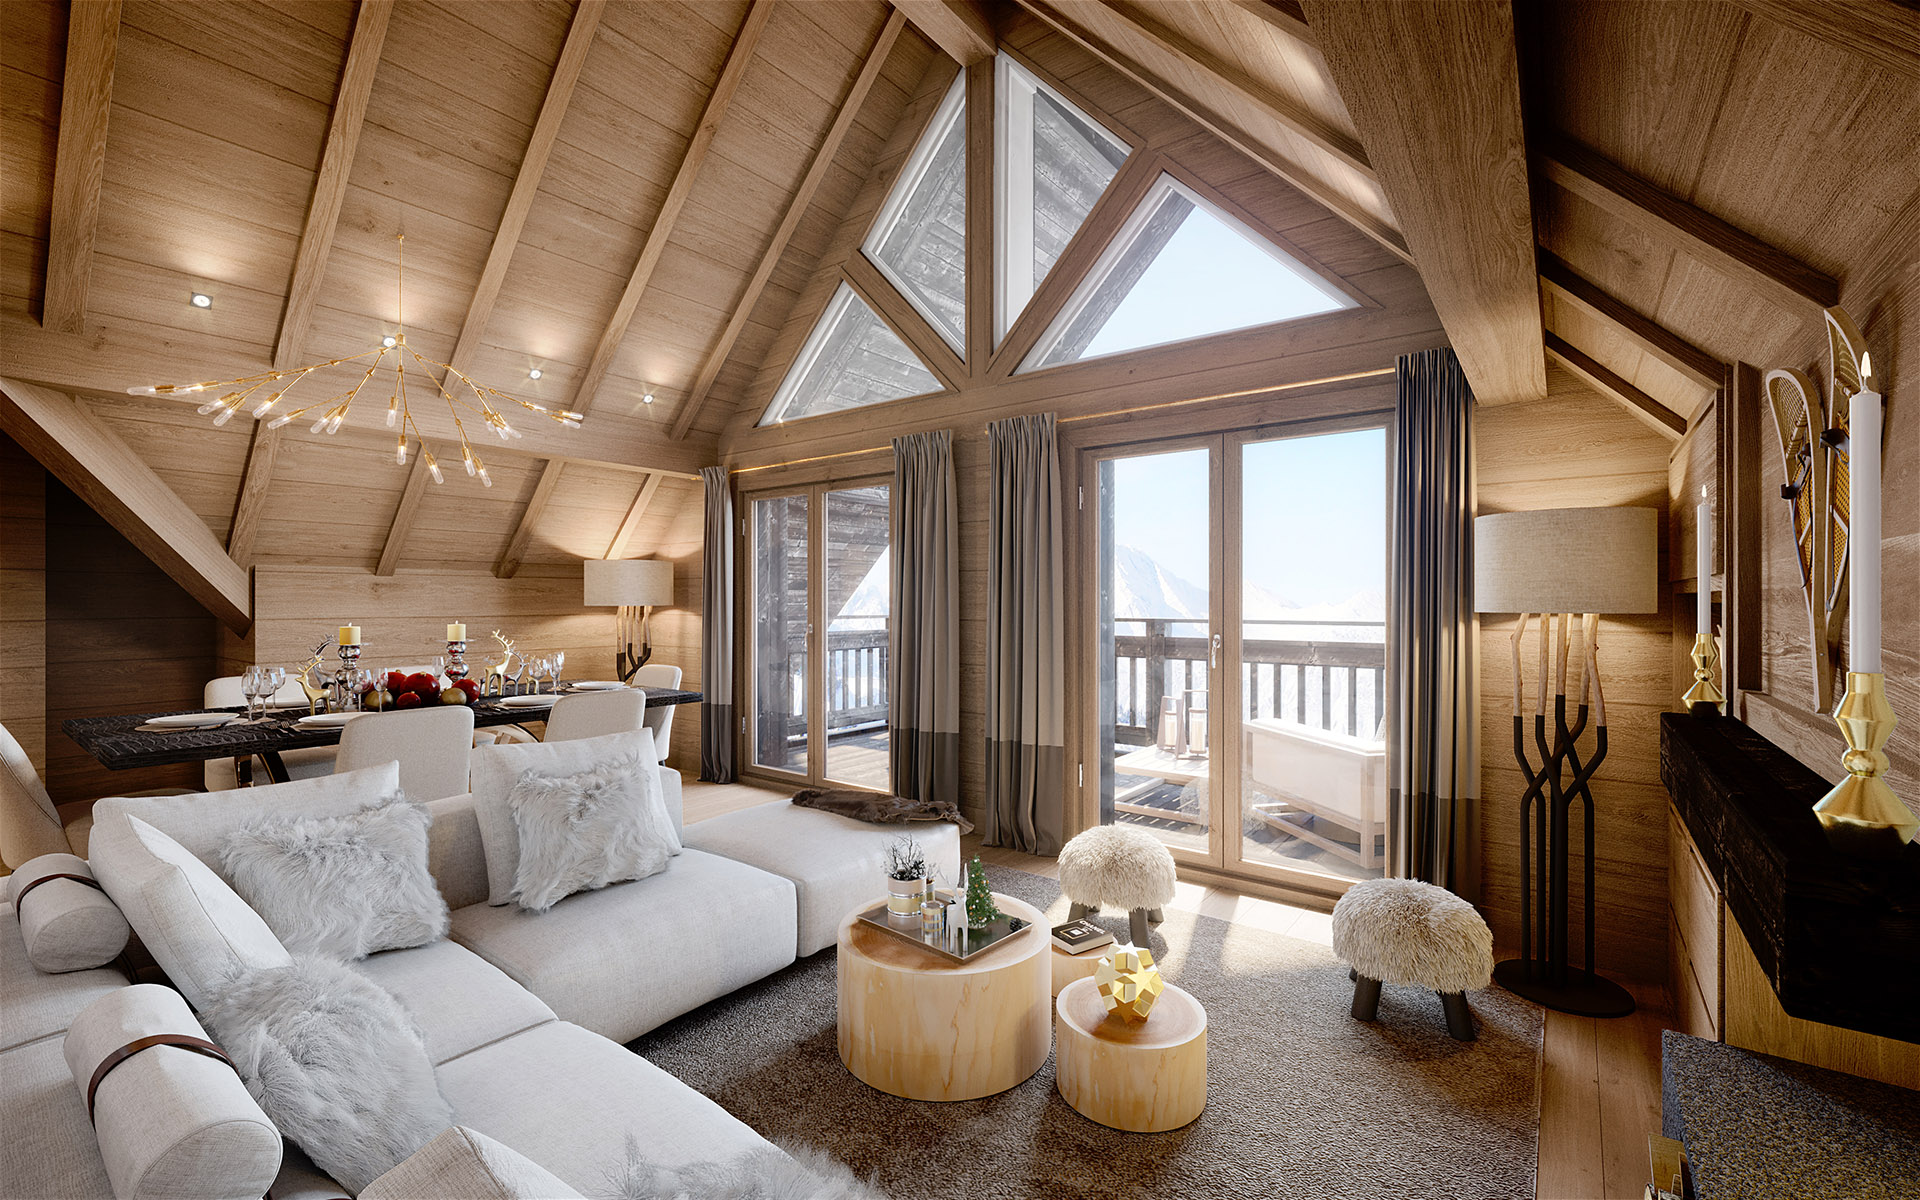 3D graphics of a living room in a rustic and luxurious cottage